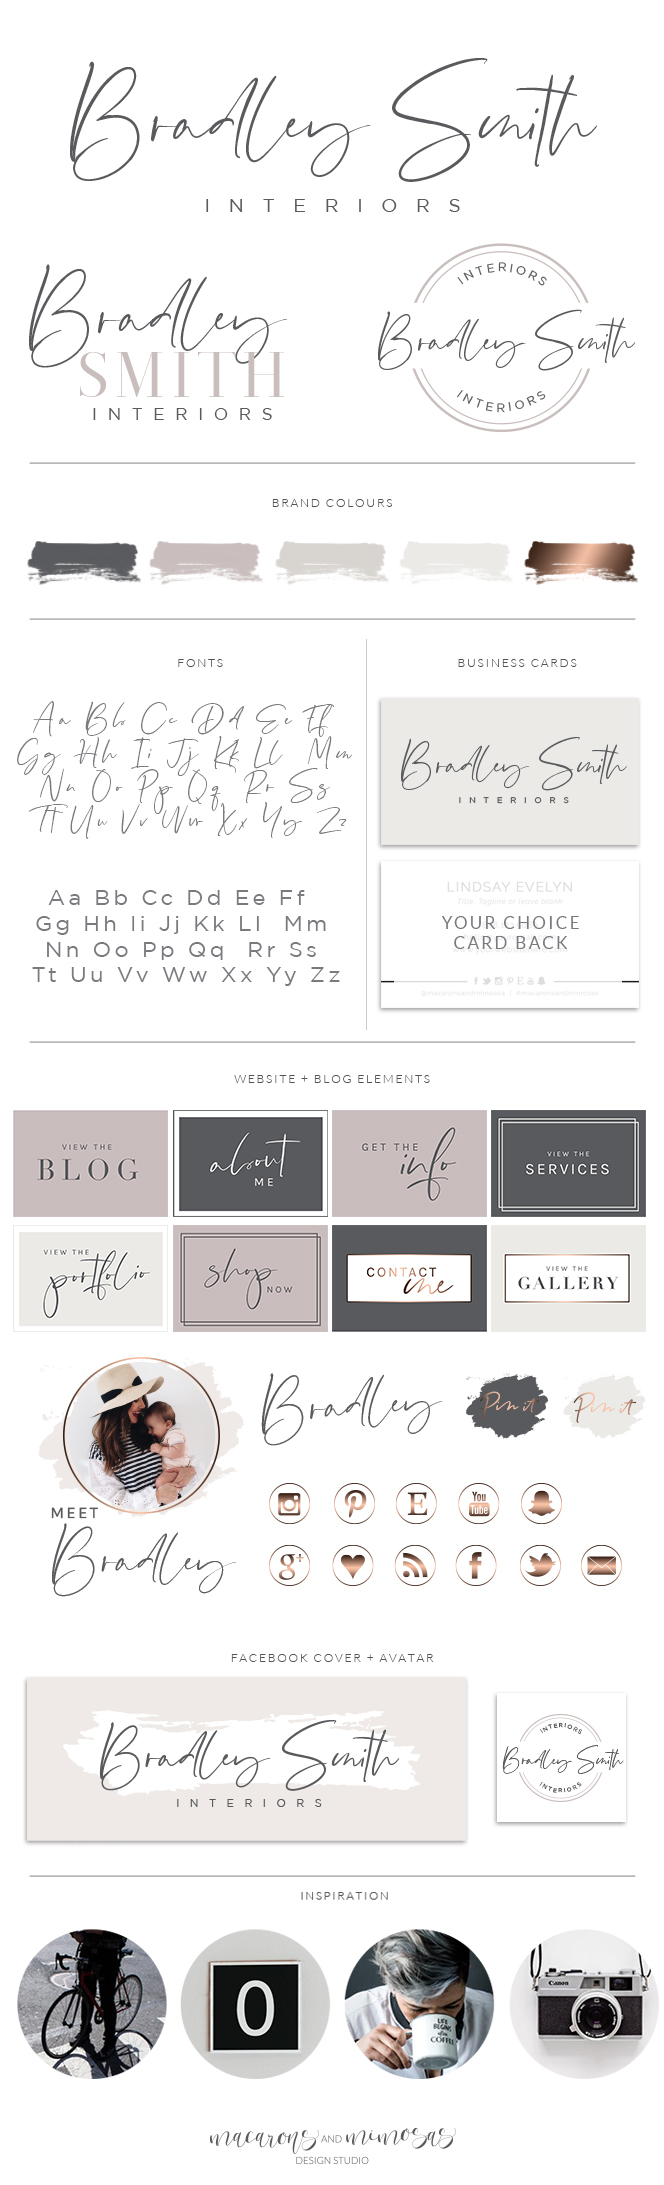 handwritten calligraphy logo design and branding kit for small businesses and shops, clean simple font-based logo with circle